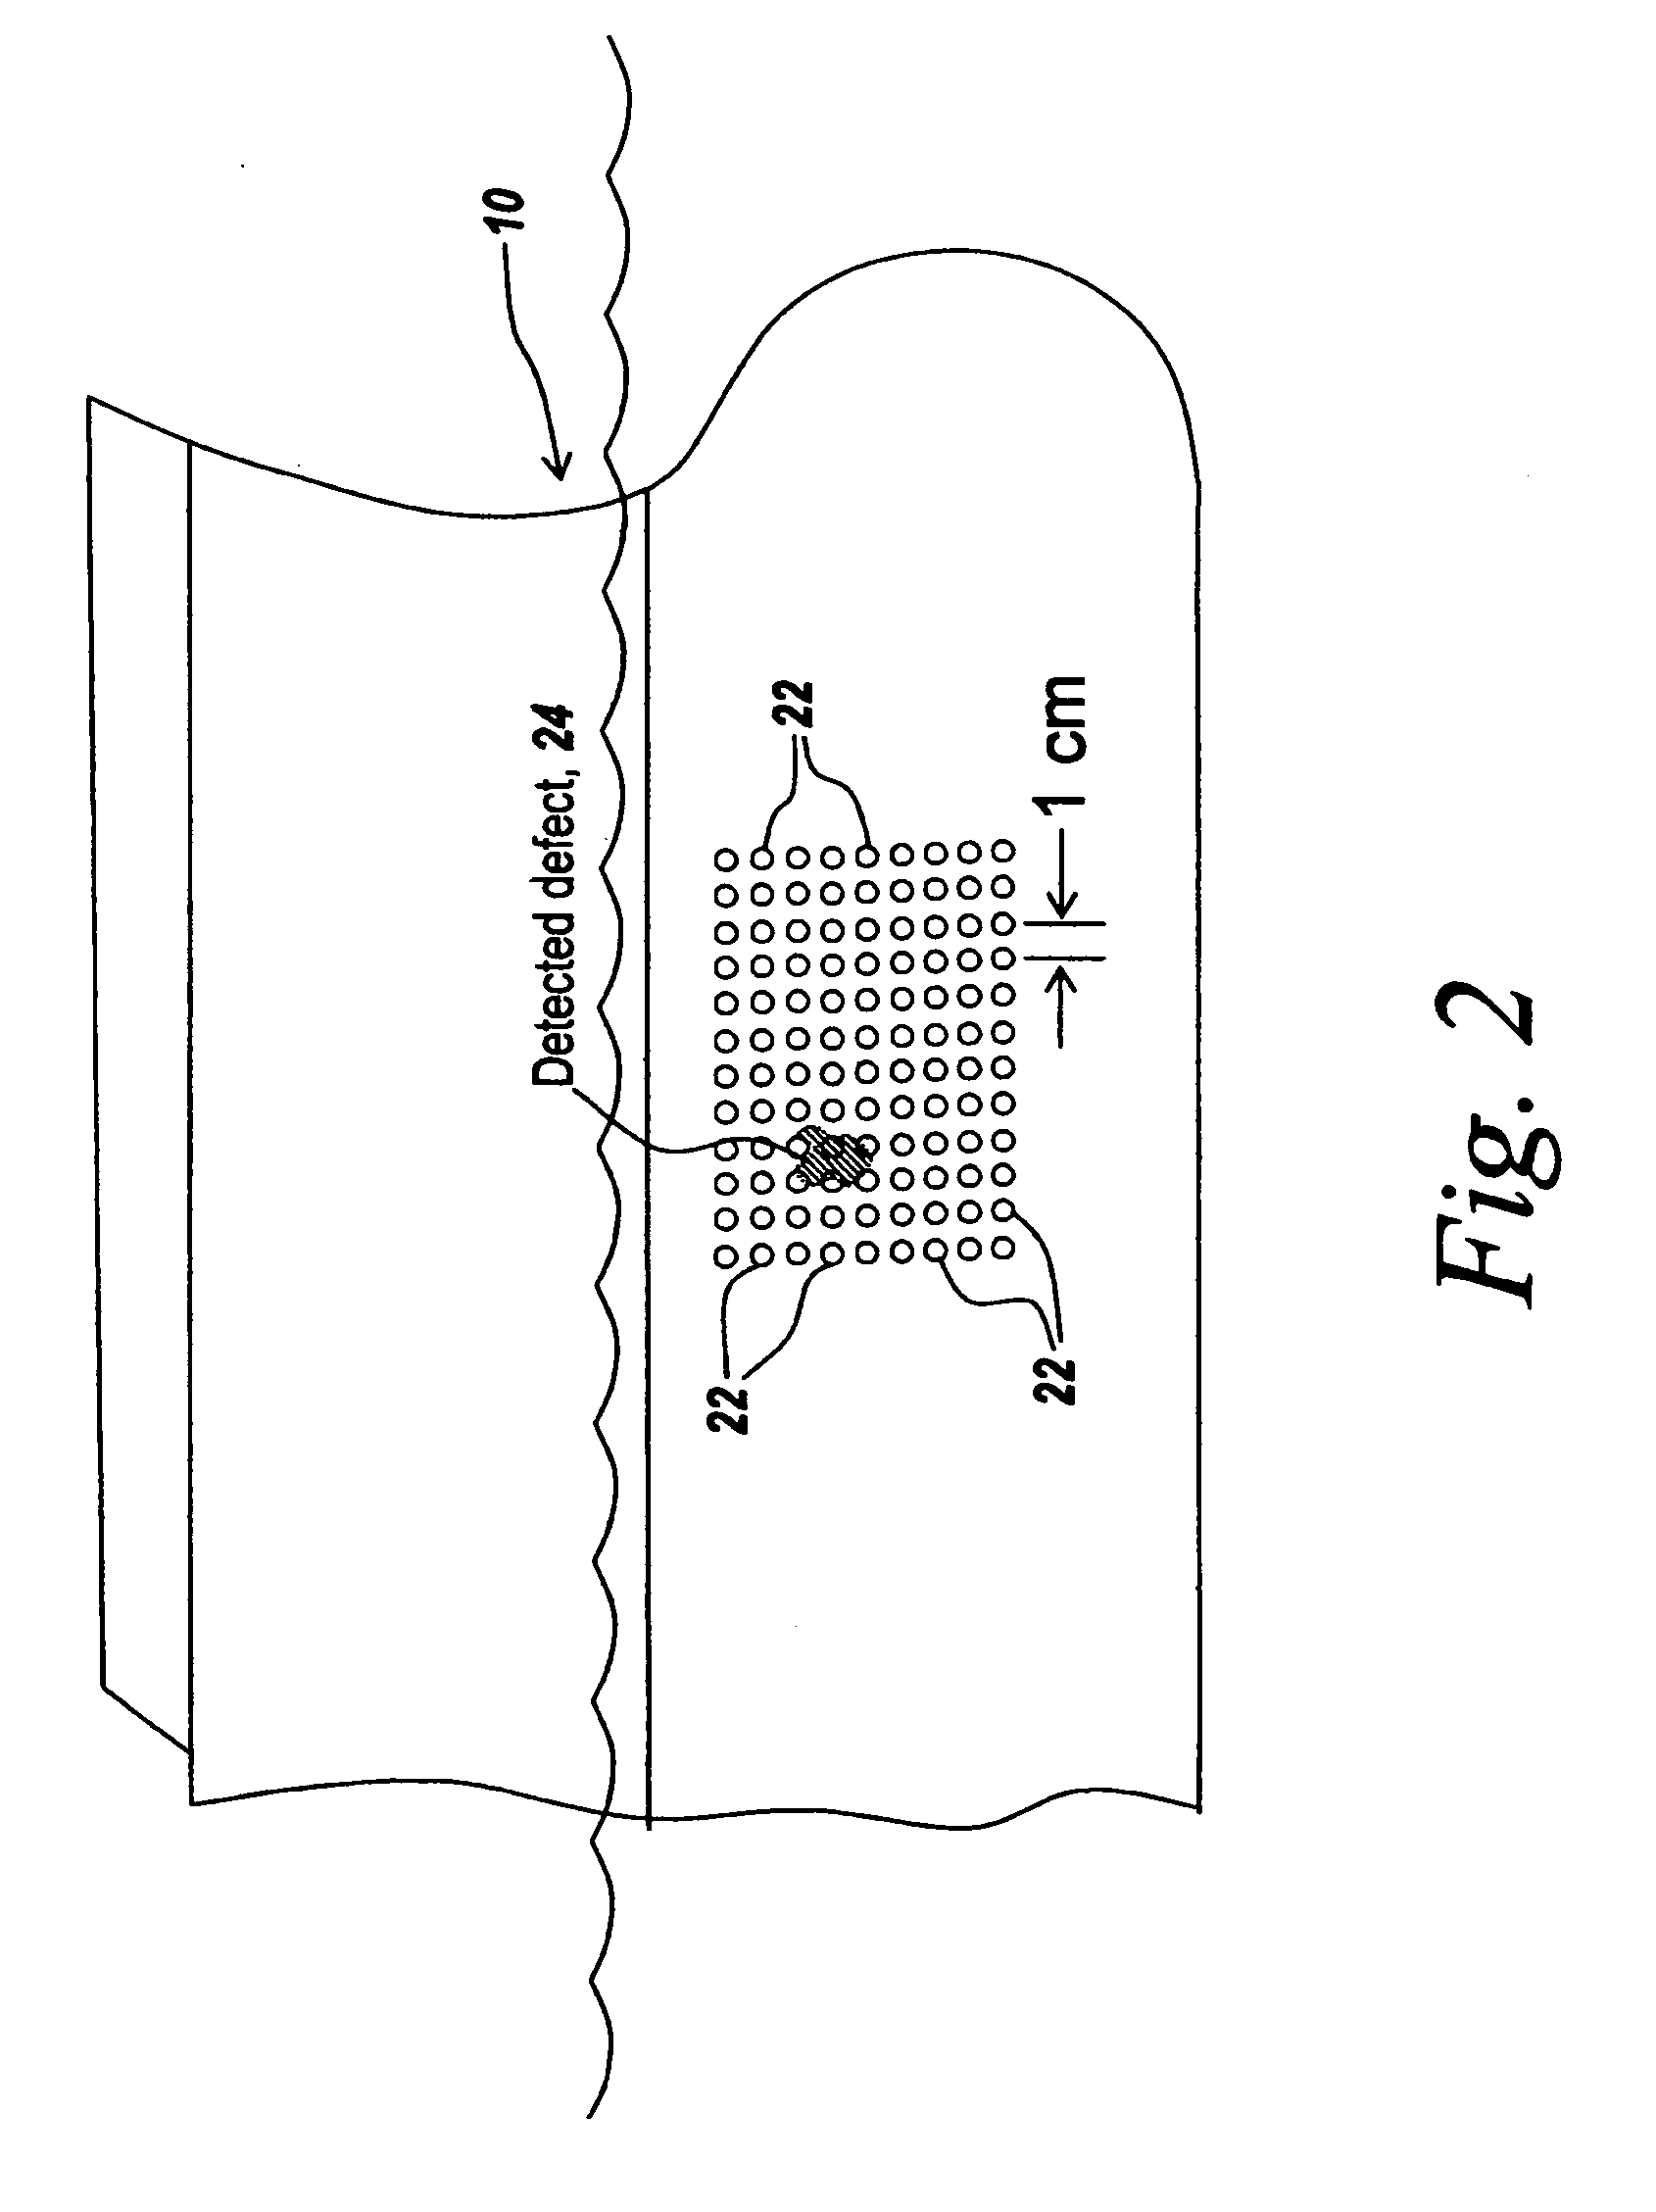 Method and apparatus for performing an ultrasonic survey